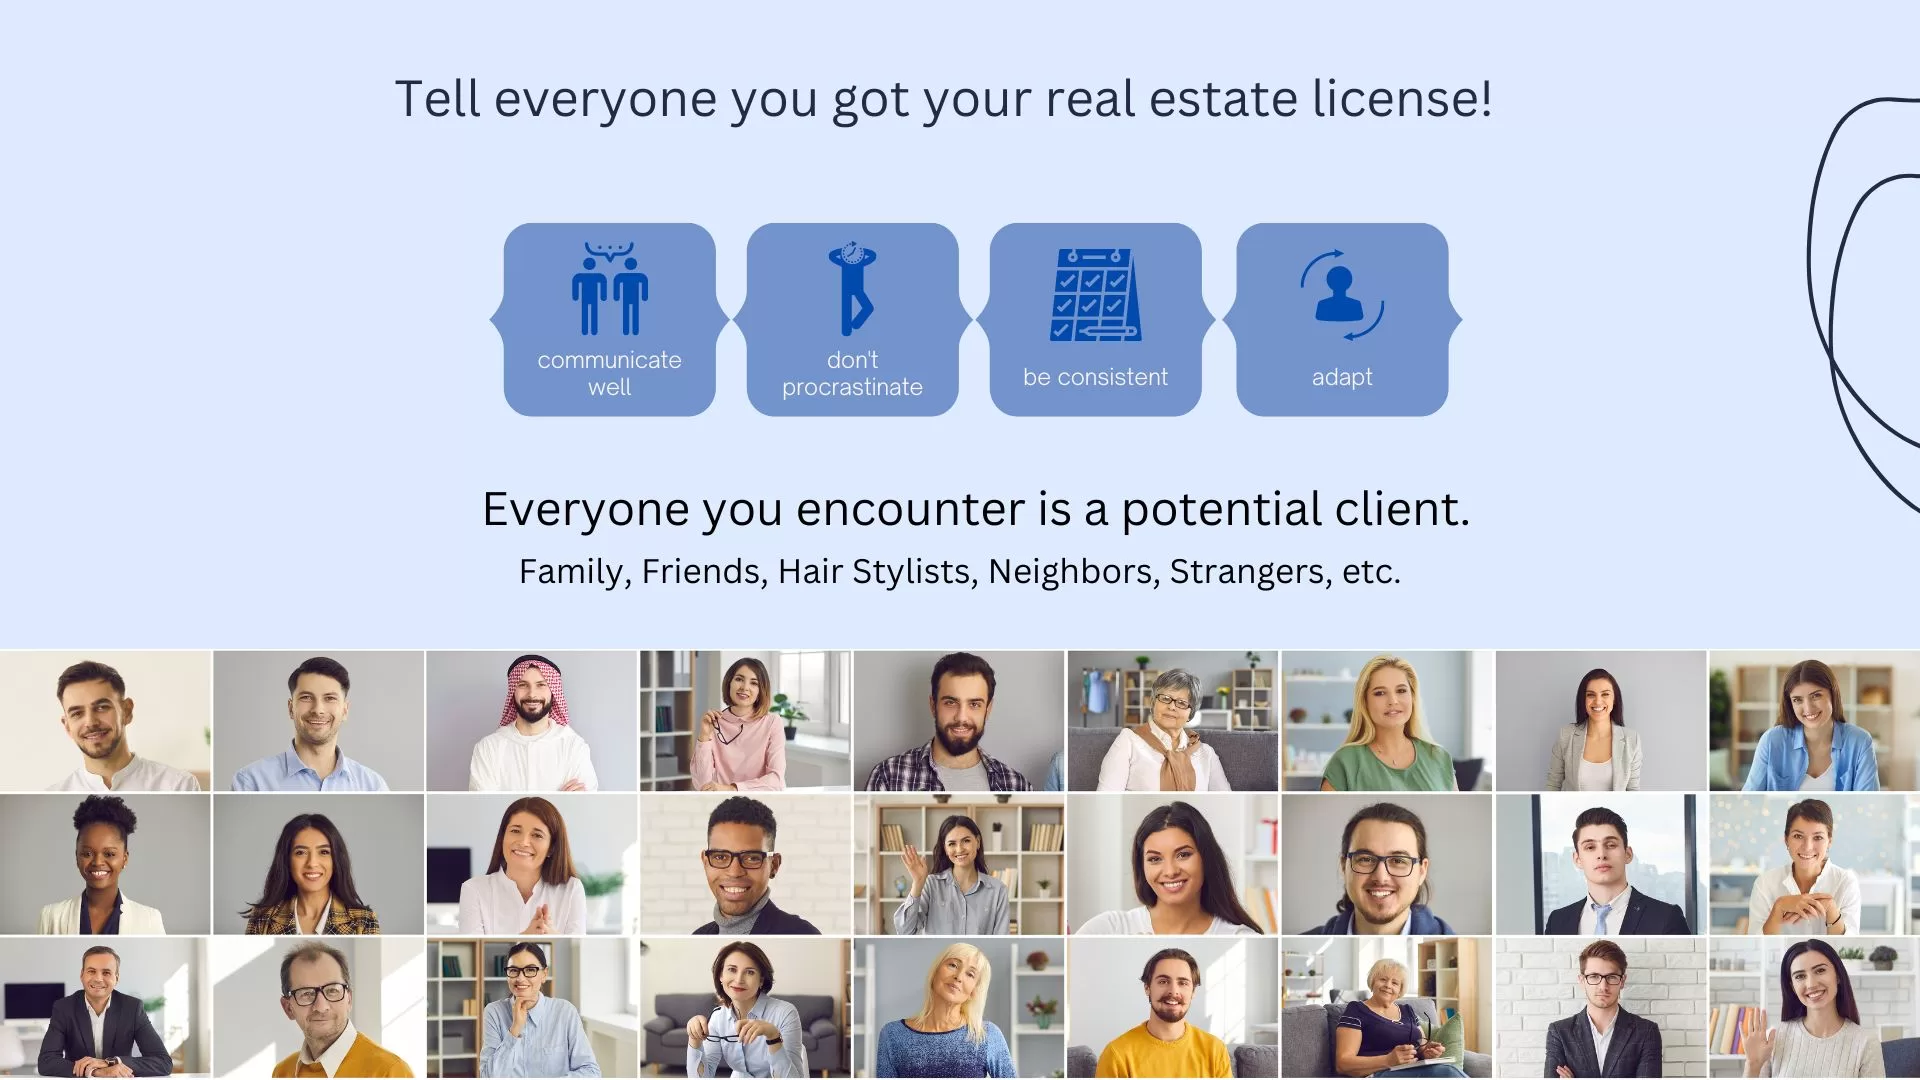 Marketing Your Real Estate License